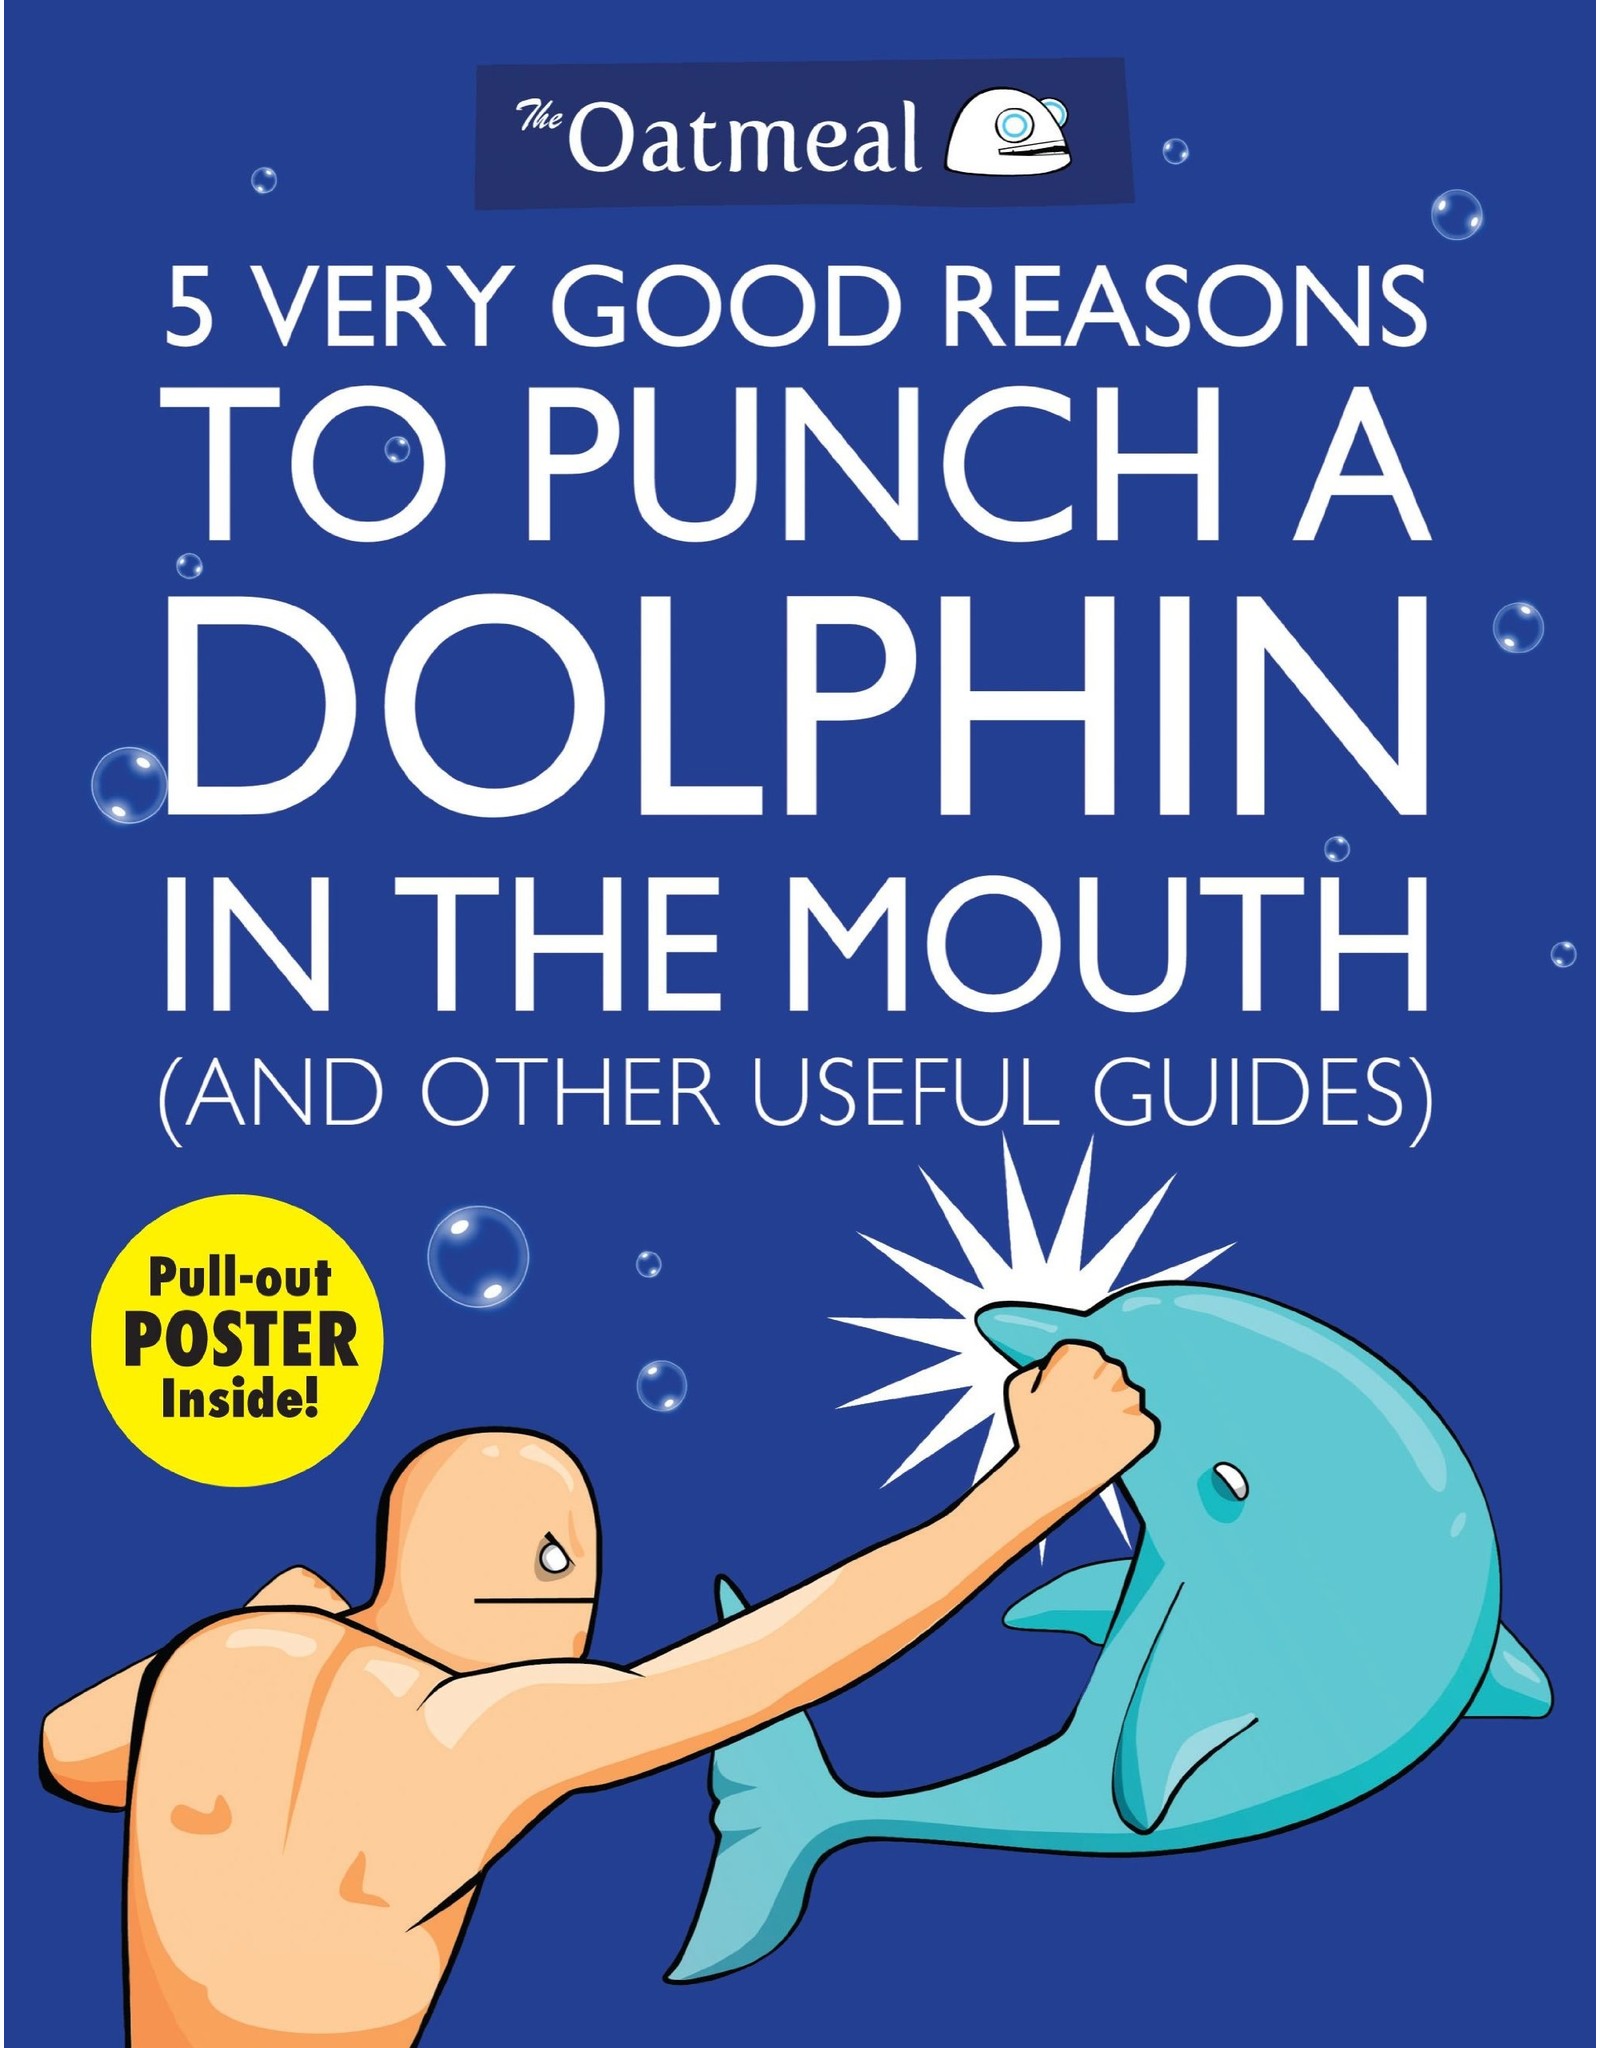 Literature 5 Very Good Reasons to Punch a Dolphin in the Mouth (and Other Useful Guides) [With Poster]